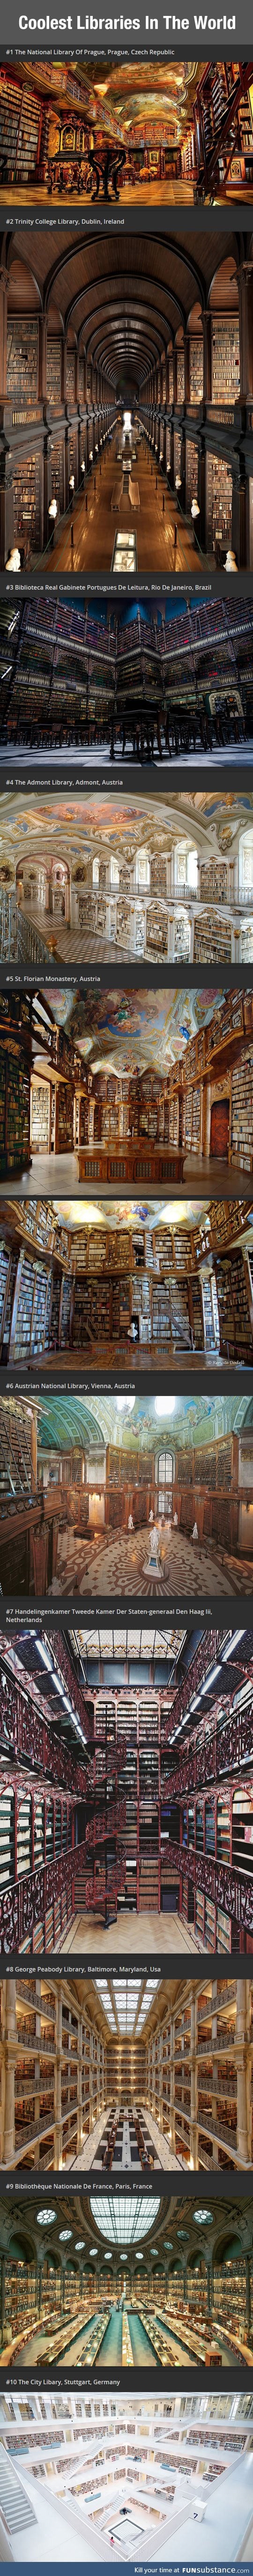 Best libraries in the world